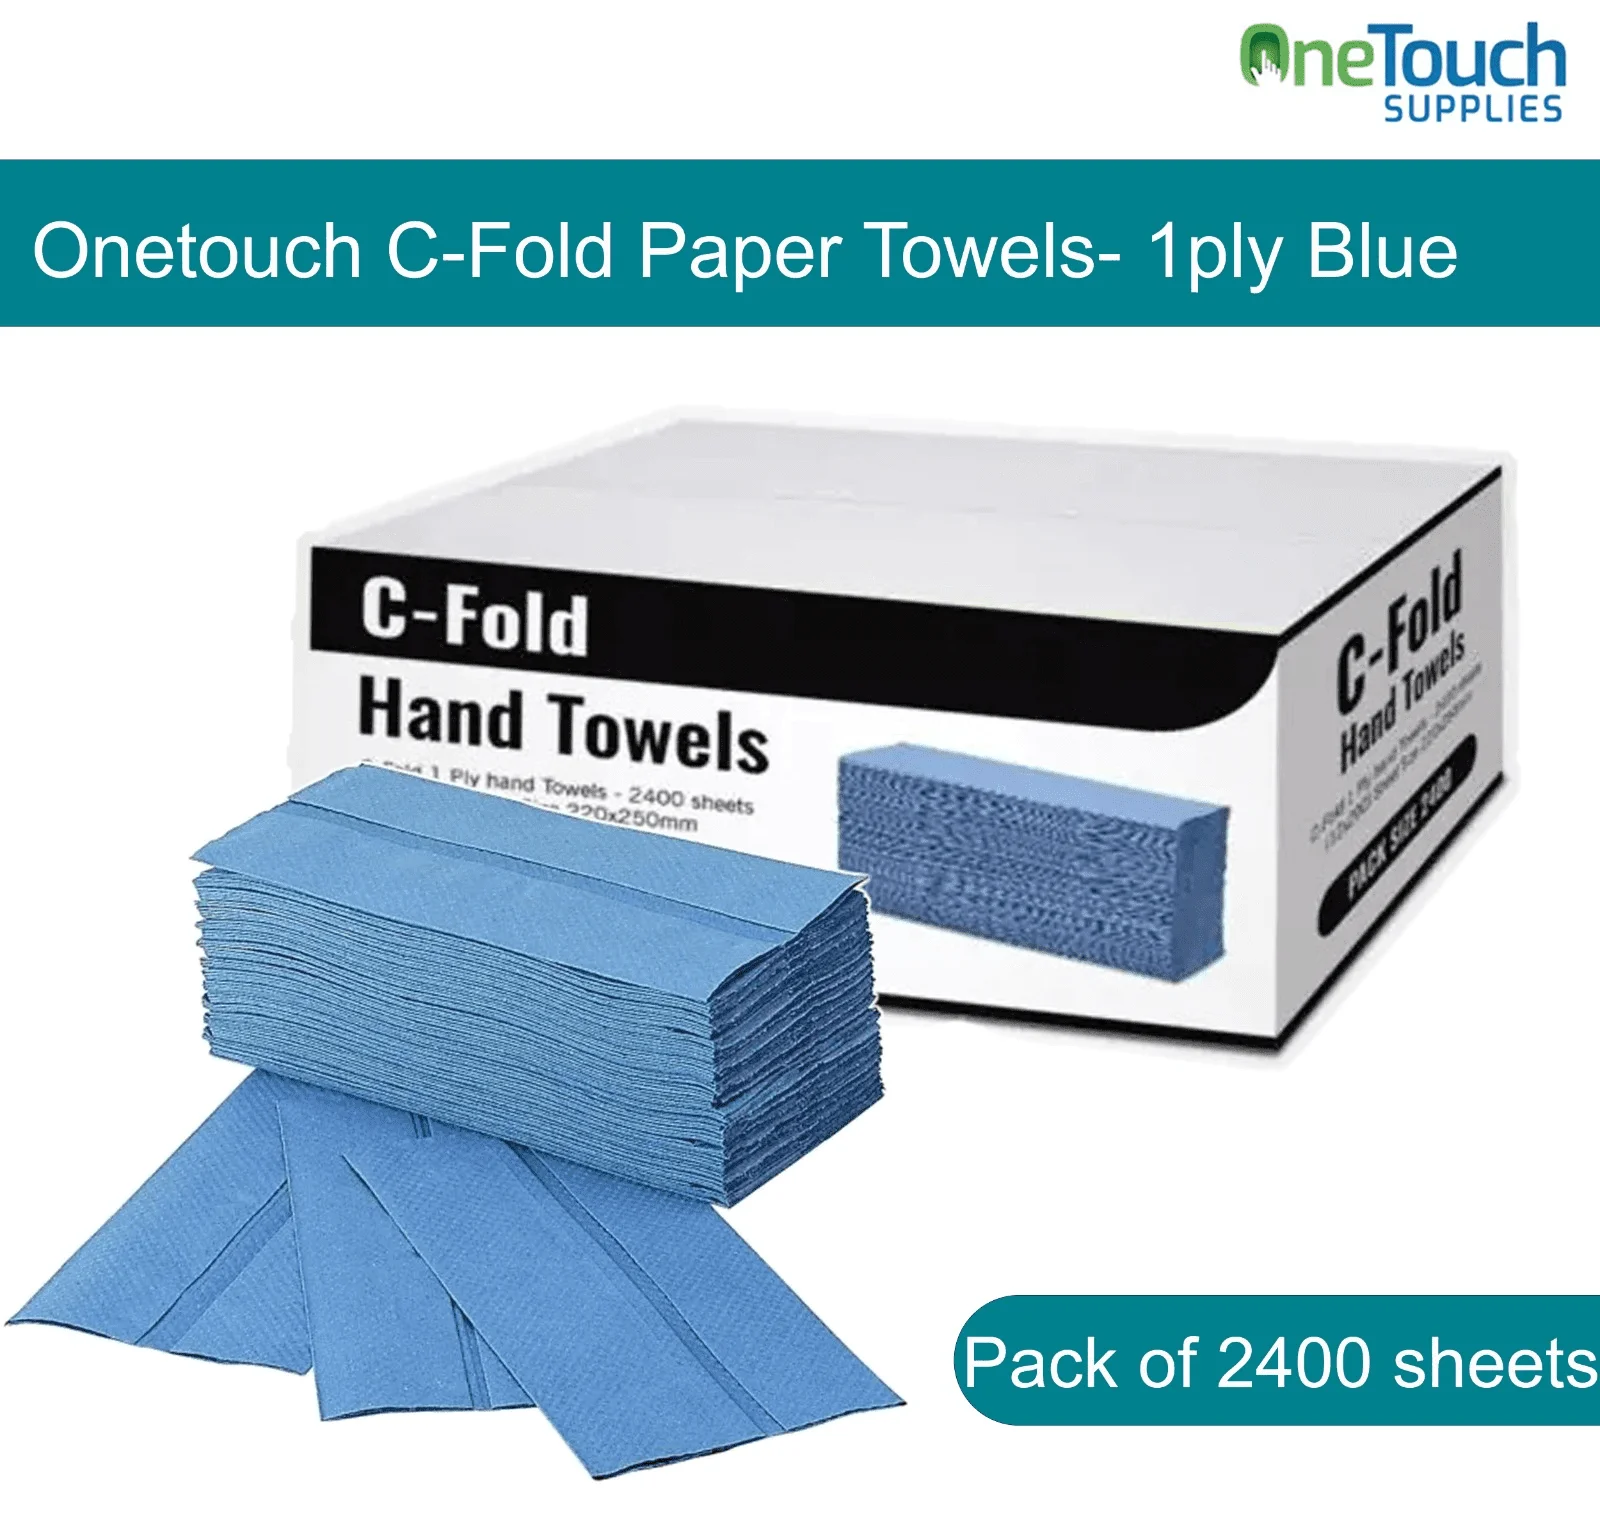 Shop our premium C Fold Paper Towels in vibrant blue colour, offering 1 ply (2400 sheets) in a box. Our hand towels are perfect for commercial use.